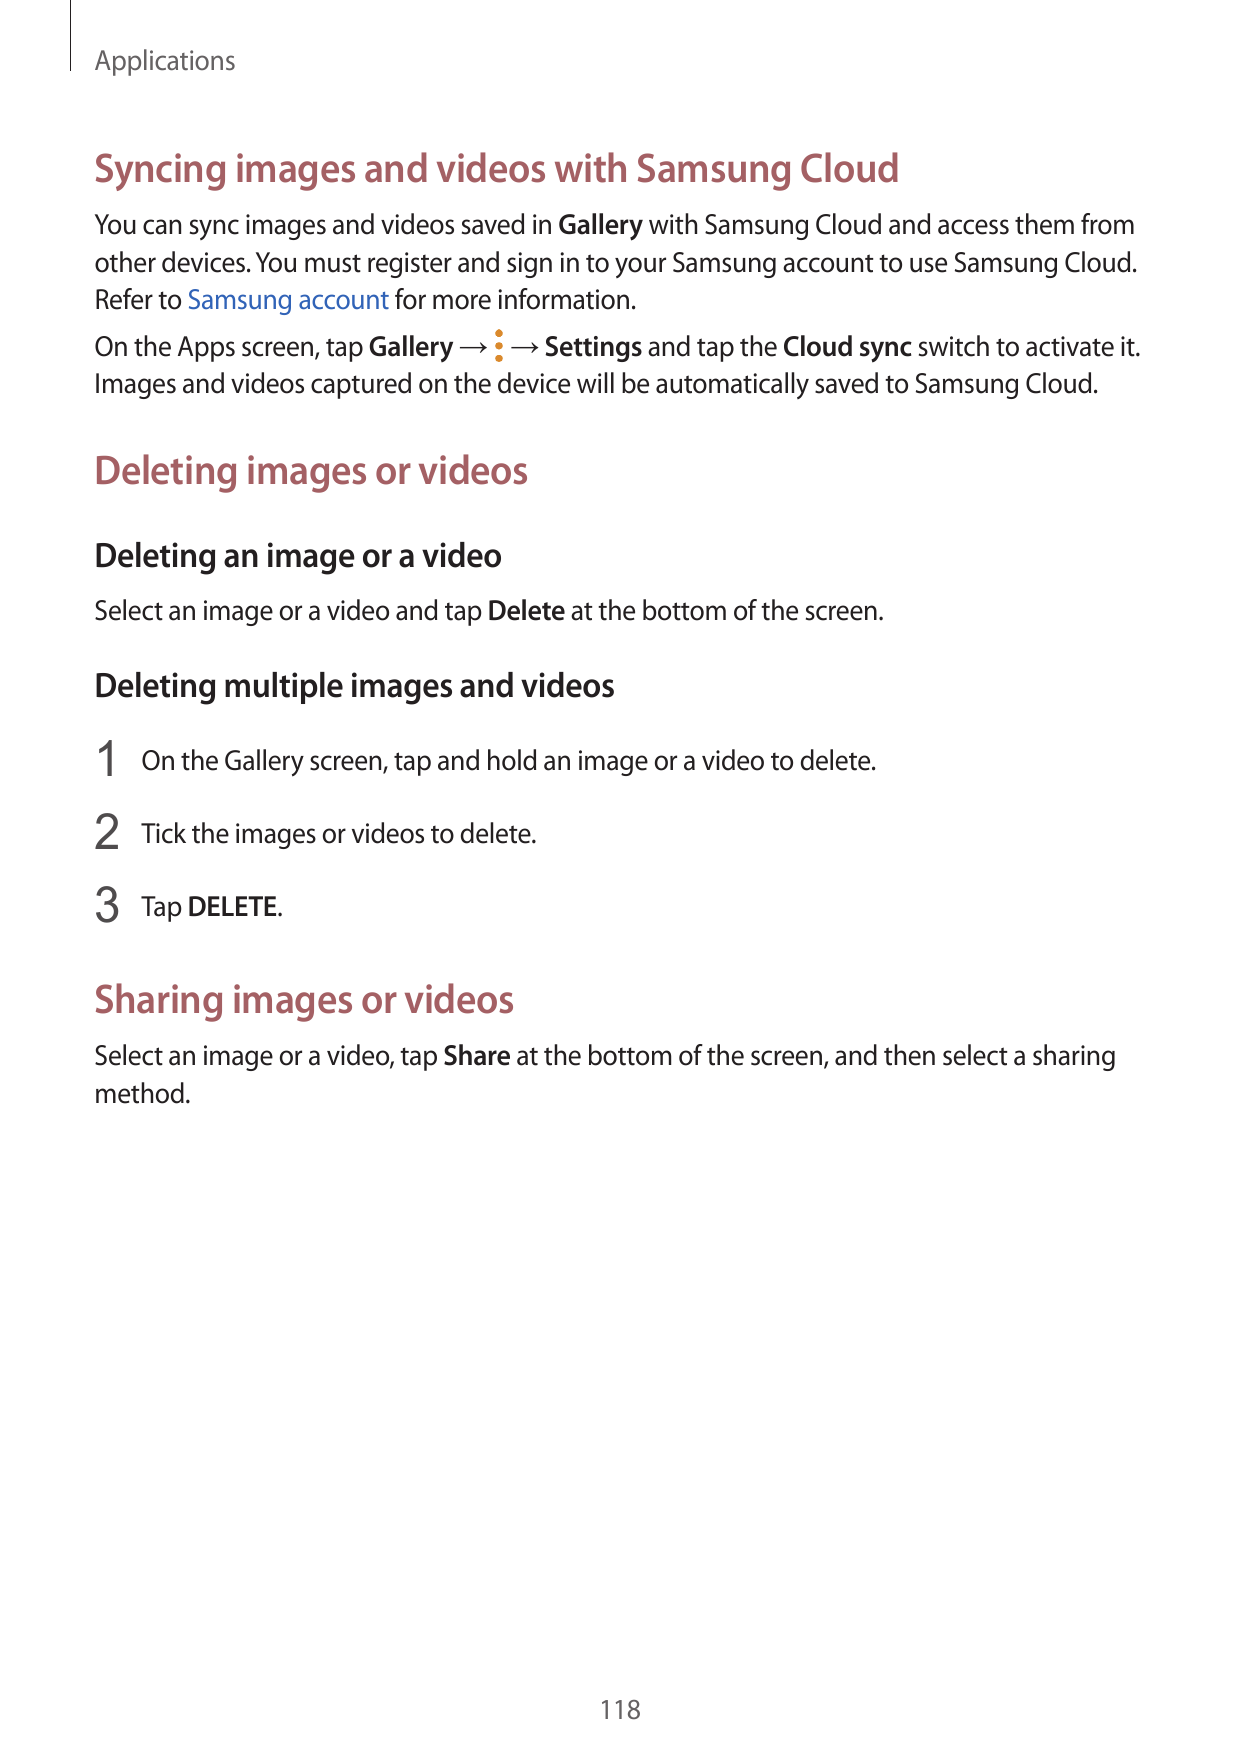 ApplicationsSyncing images and videos with Samsung CloudYou can sync images and videos saved in Gallery with Samsung Cloud and a